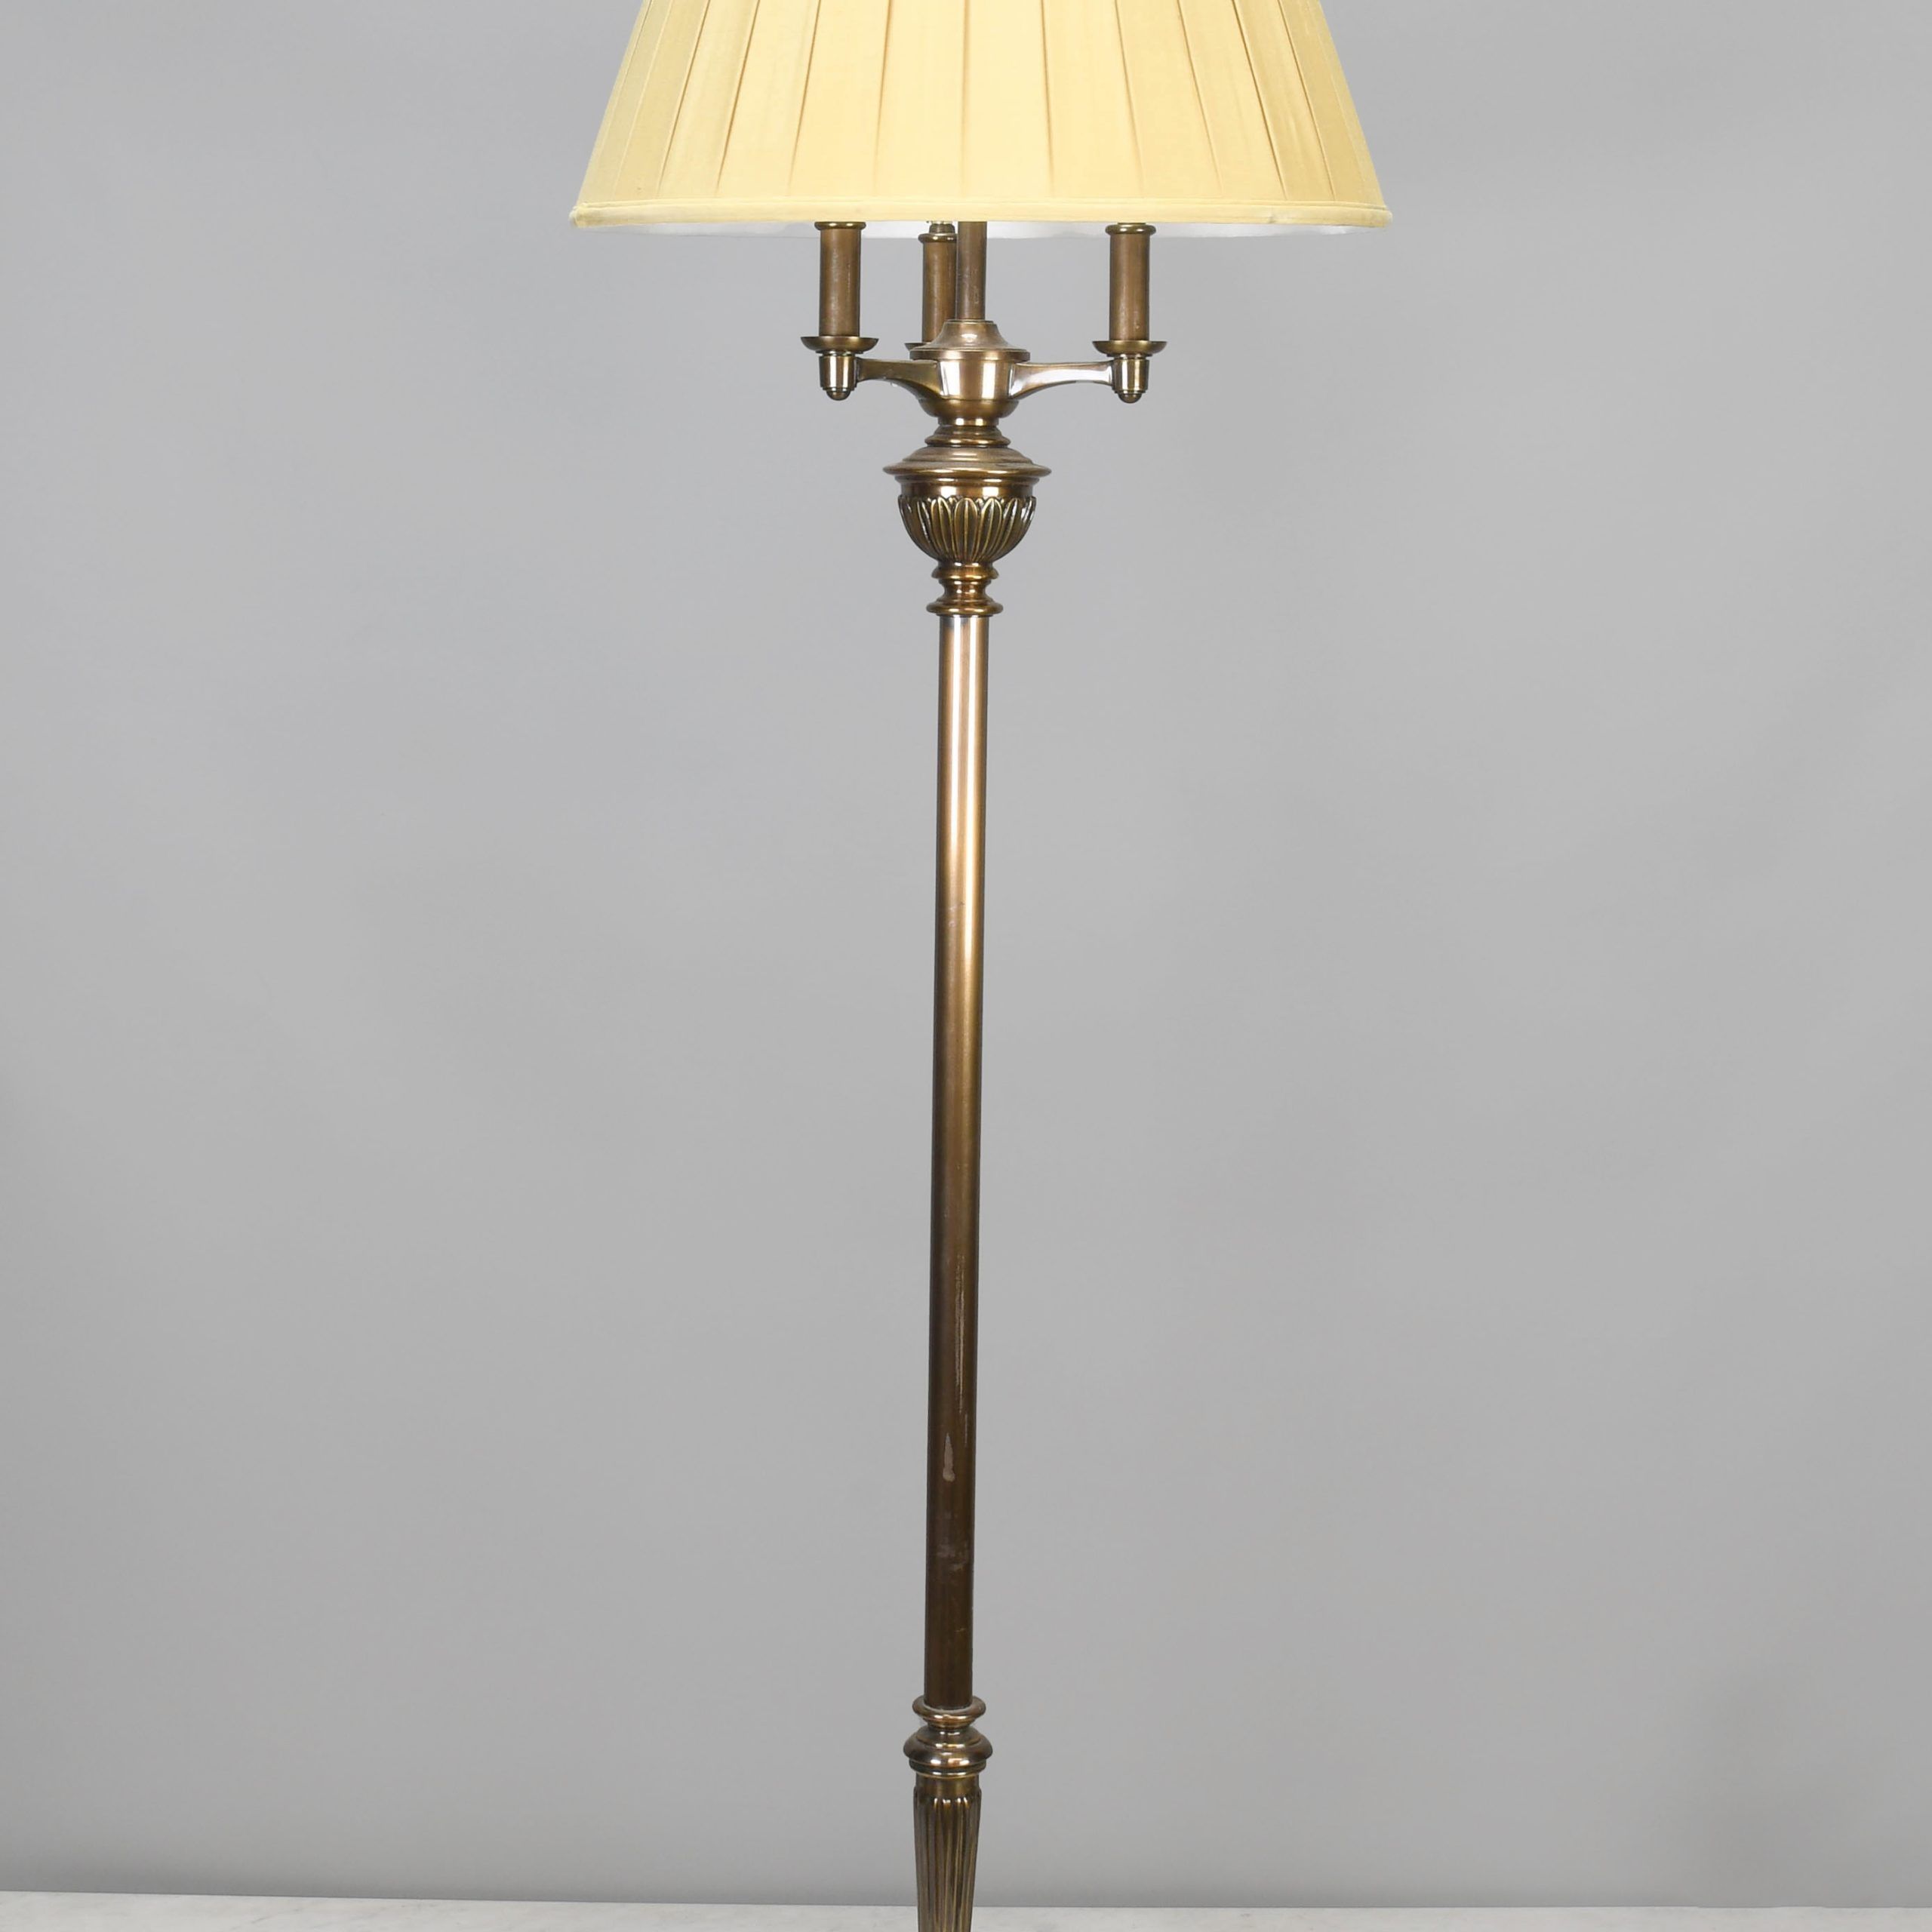 Most Recent Antique Brass Standing Lamps With Regard To Three Candle Antique Brass Floor Lamp (View 8 of 15)